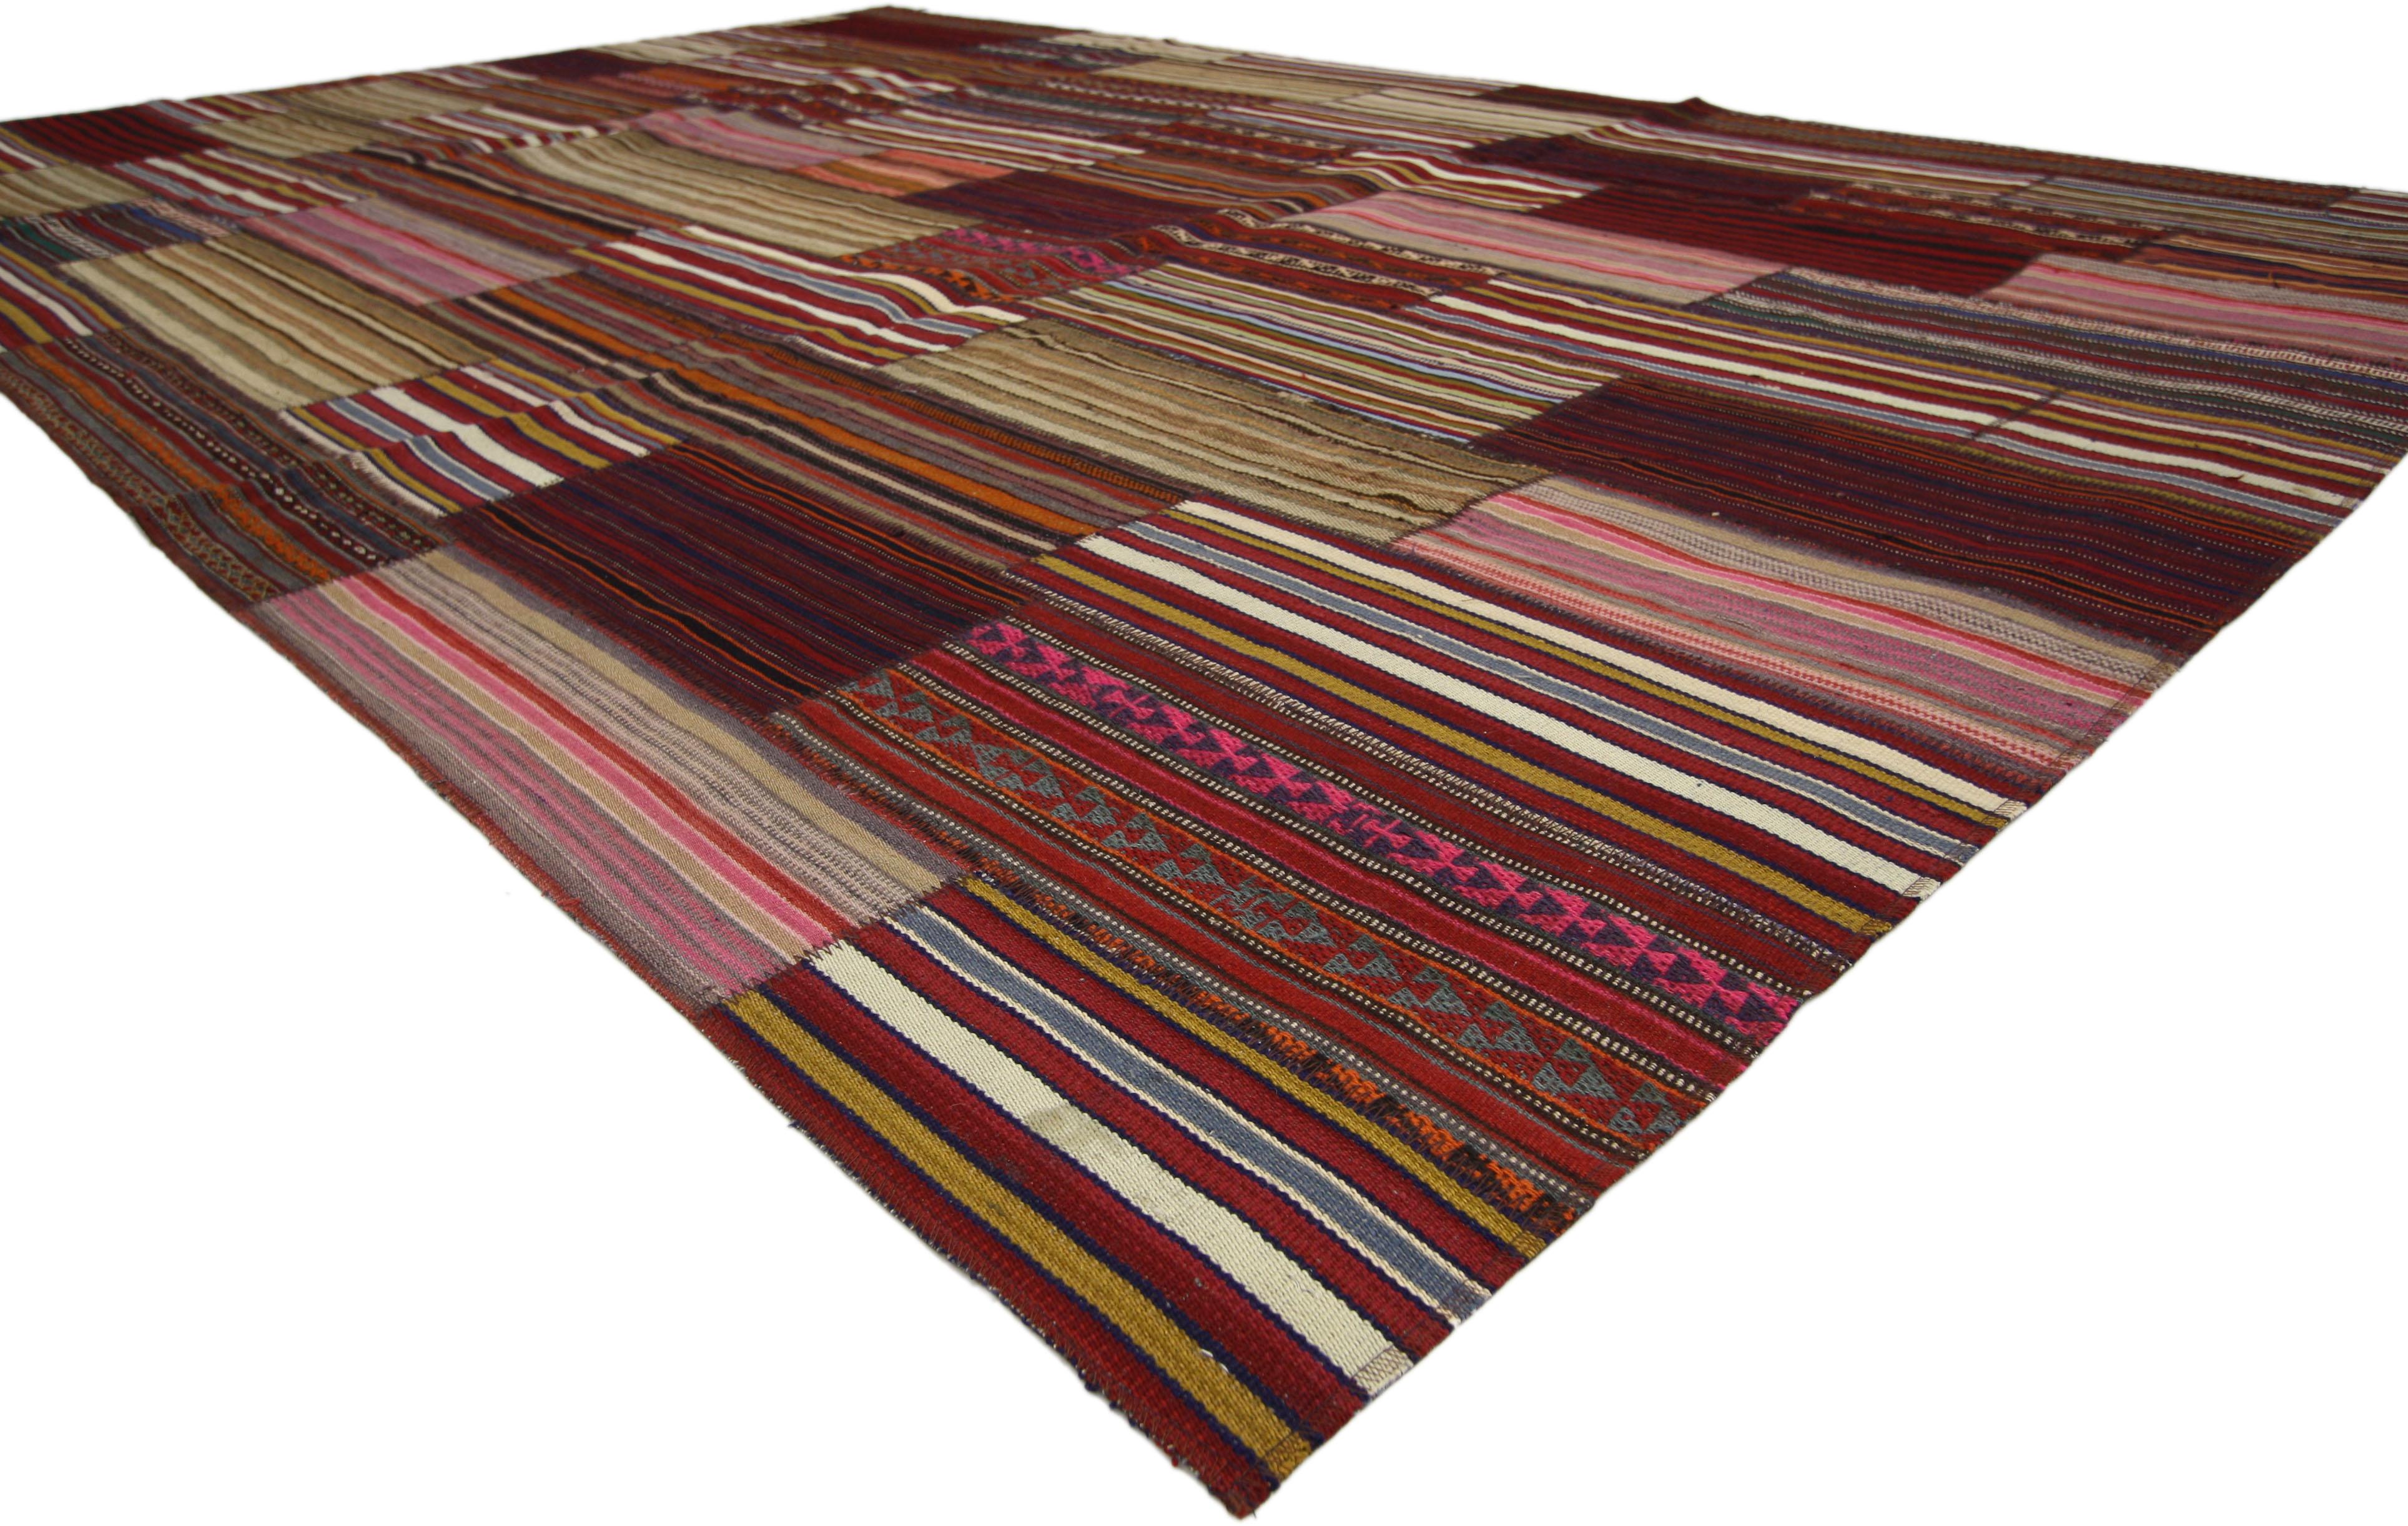 60792 Vintage Turkish Jajim Striped Kilim Rug with Modern Rustic Cabin Style 07'05 x 11'05. With its rustic sensibility and rugged beauty, this hand-woven wool vintage Turkish striped kilim rug manages to meld contemporary, modern, and traditional